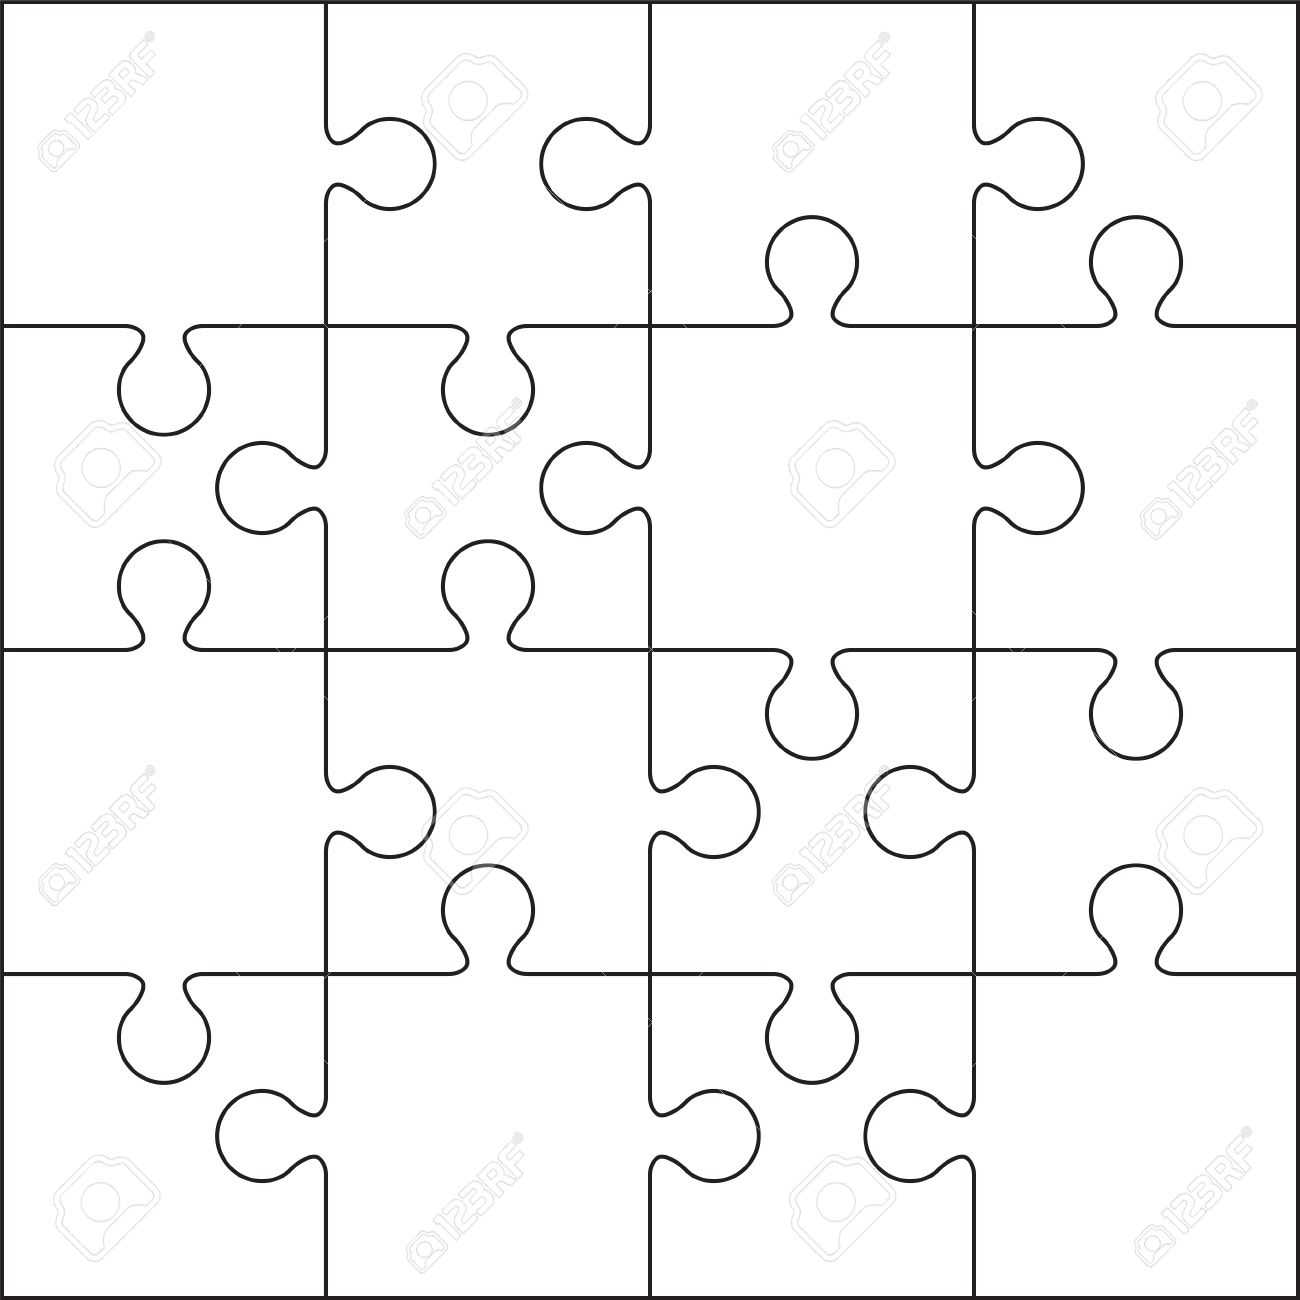 011 Jig Saw Puzzle Template Jigsaw Blank Or Cutting Intended For Jigsaw Puzzle Template For Word